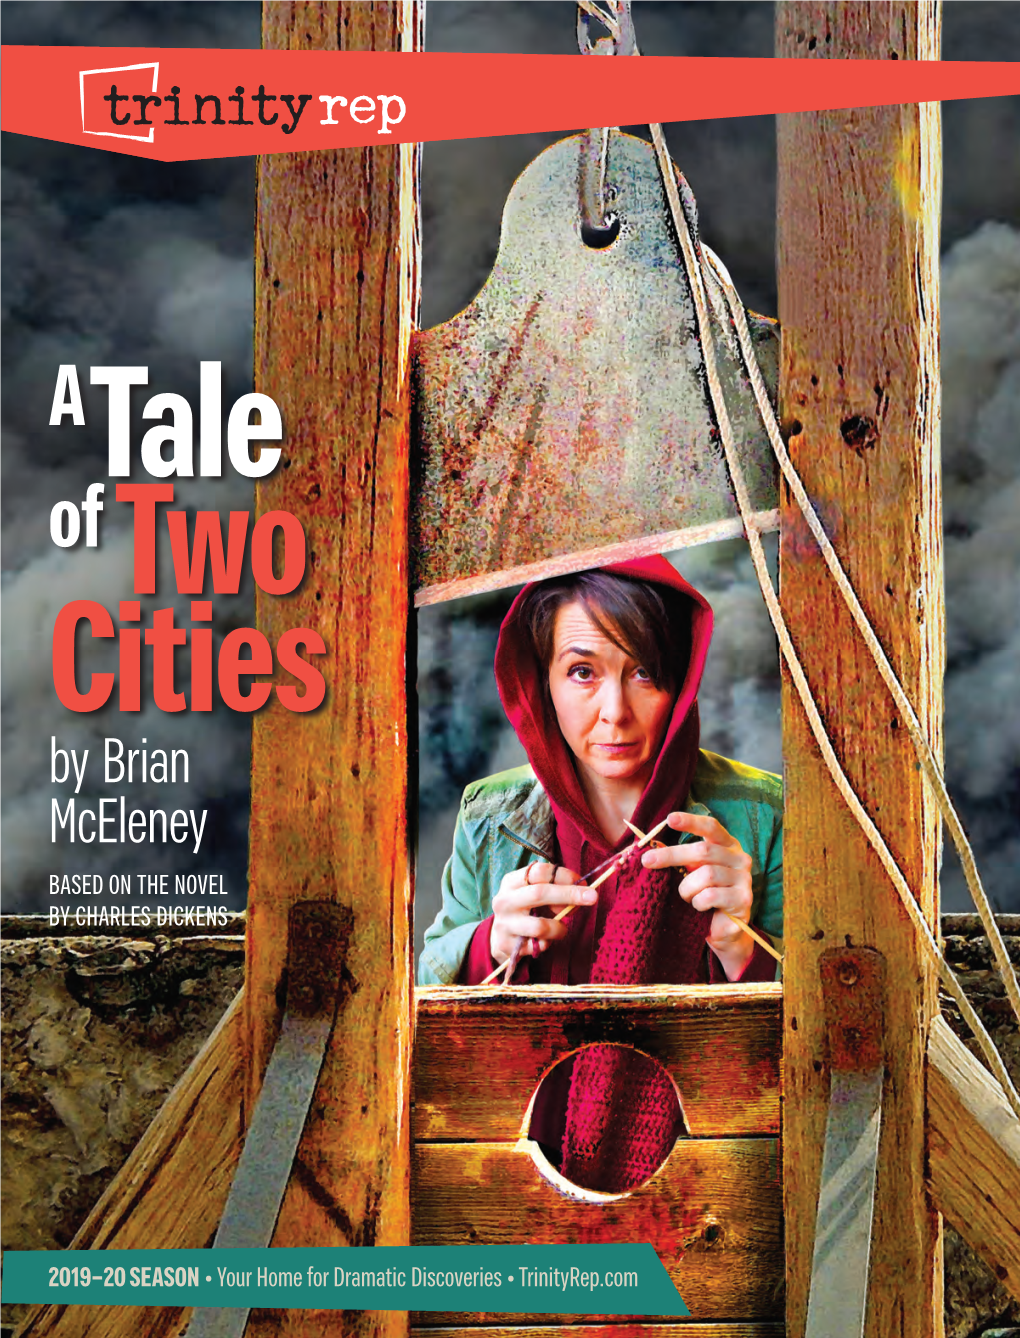 Of Two Cities by Brian Mceleney BASED on the NOVEL by CHARLES DICKENS